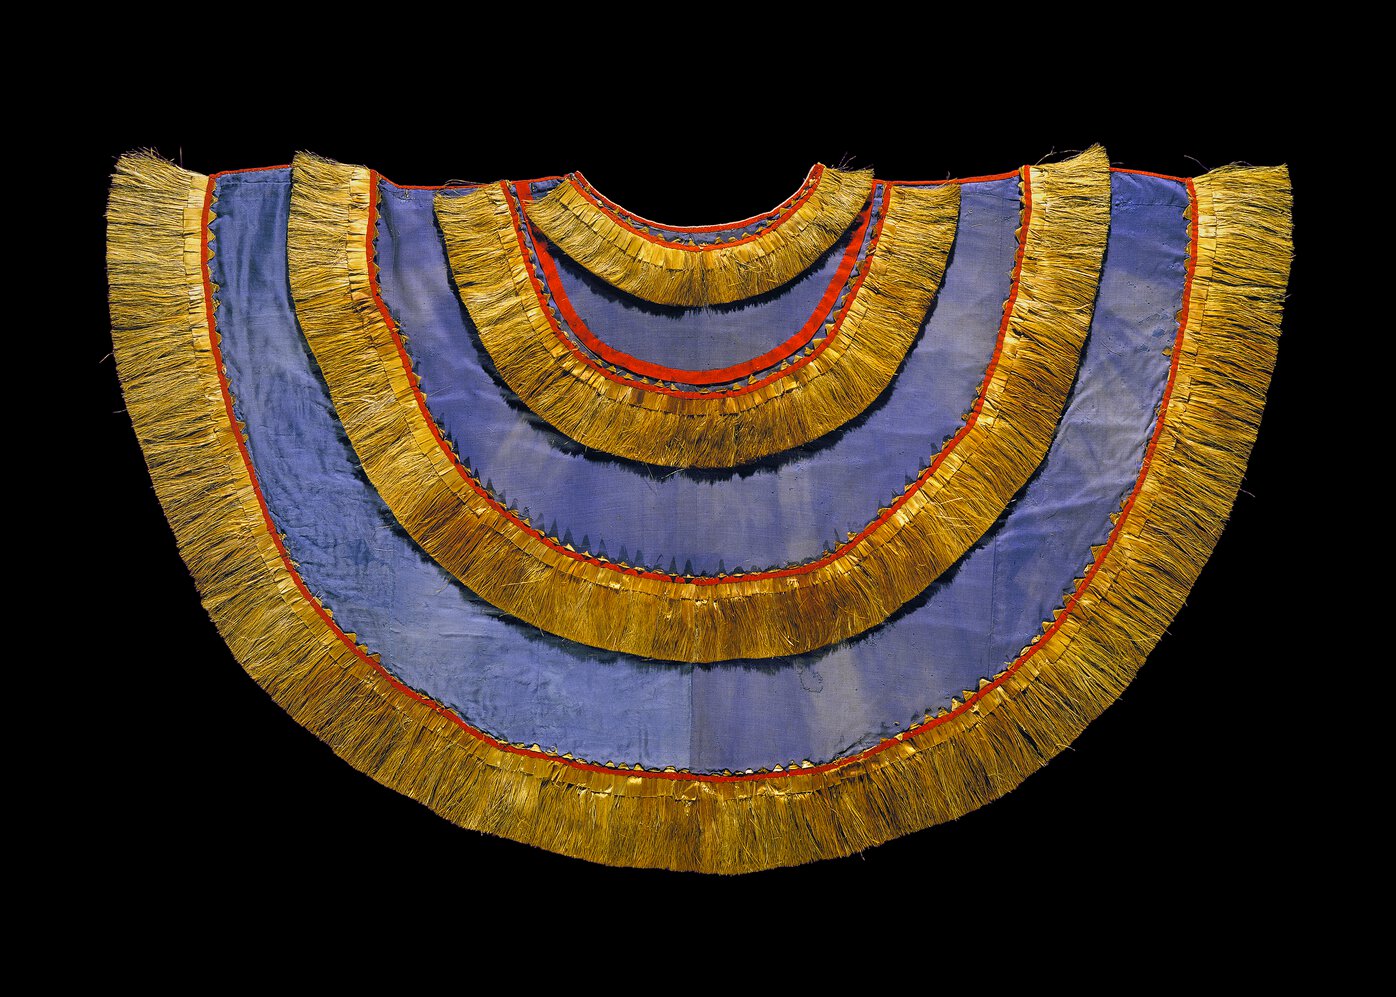 Cloak in half-cricle shape facing down, with blue cloth body and gold fibre rows trimmed with red.